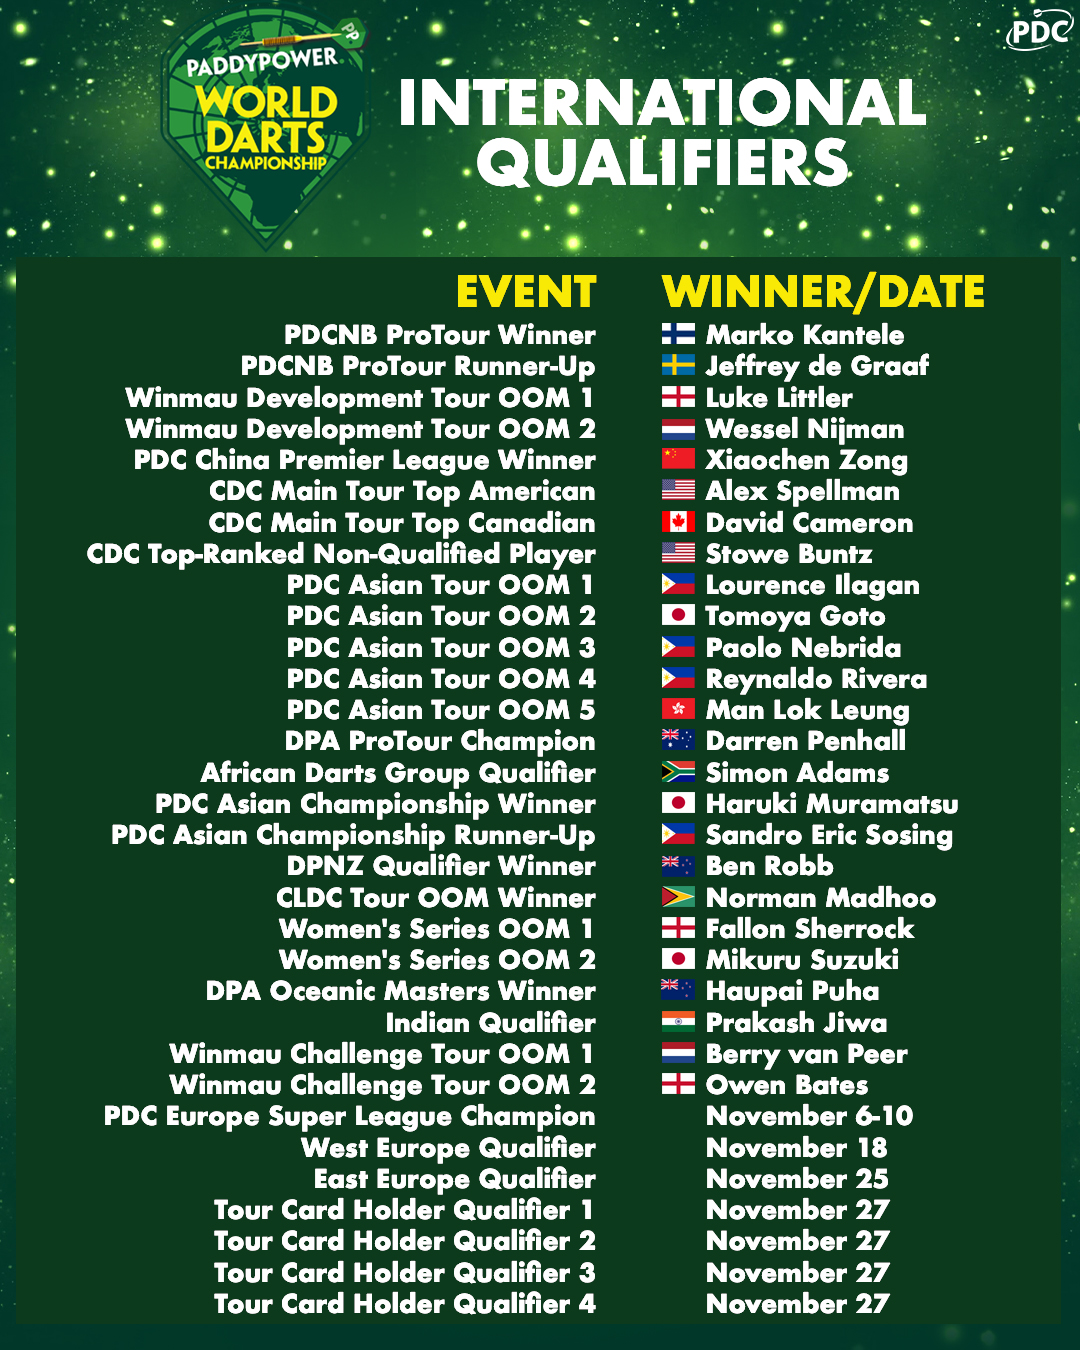 Debutant duo amongst latest Paddy Power World Darts Championship qualifiers PDC